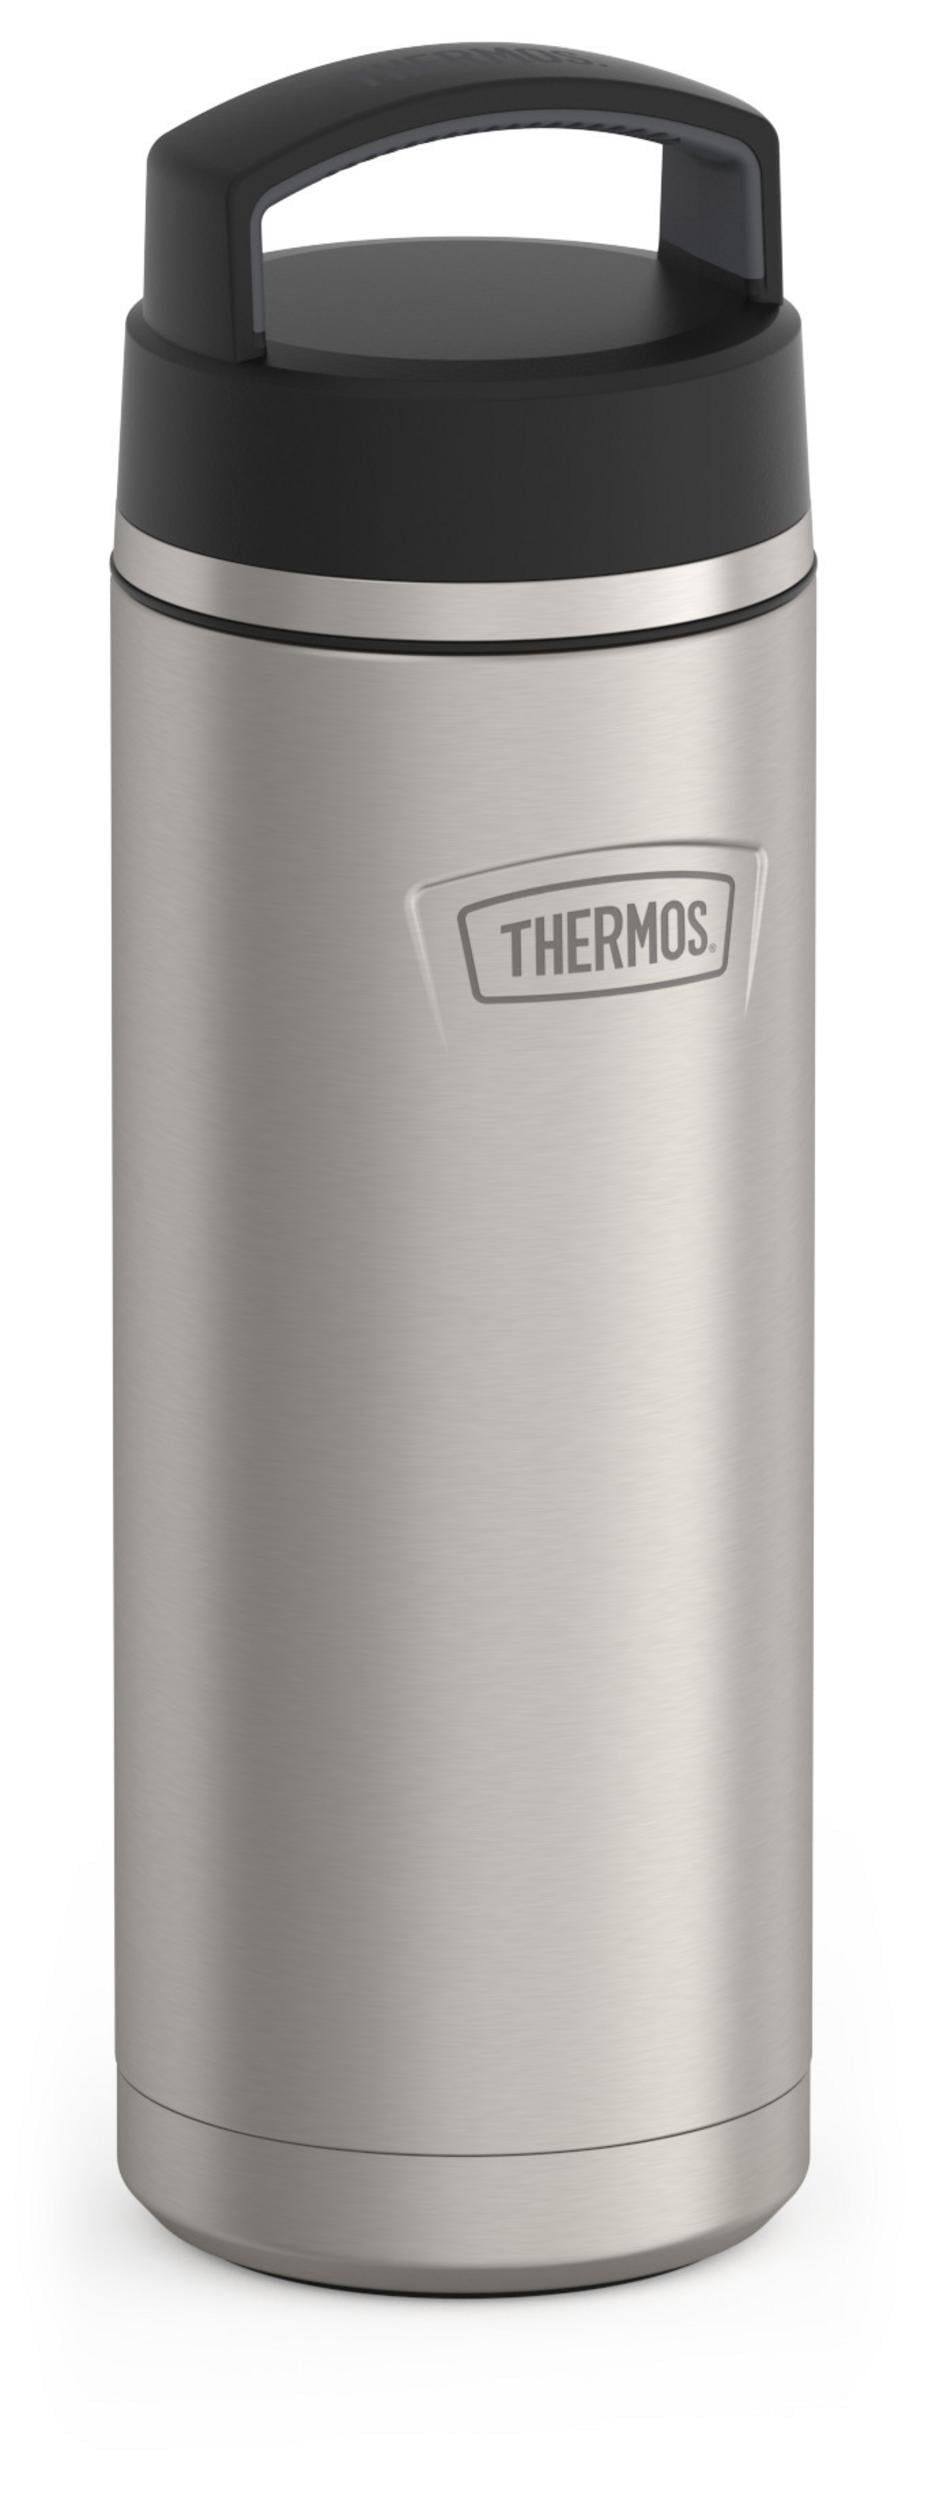 Bottle Thermoses Boy - 400ml Stainless Steel Thermos Mug Cup